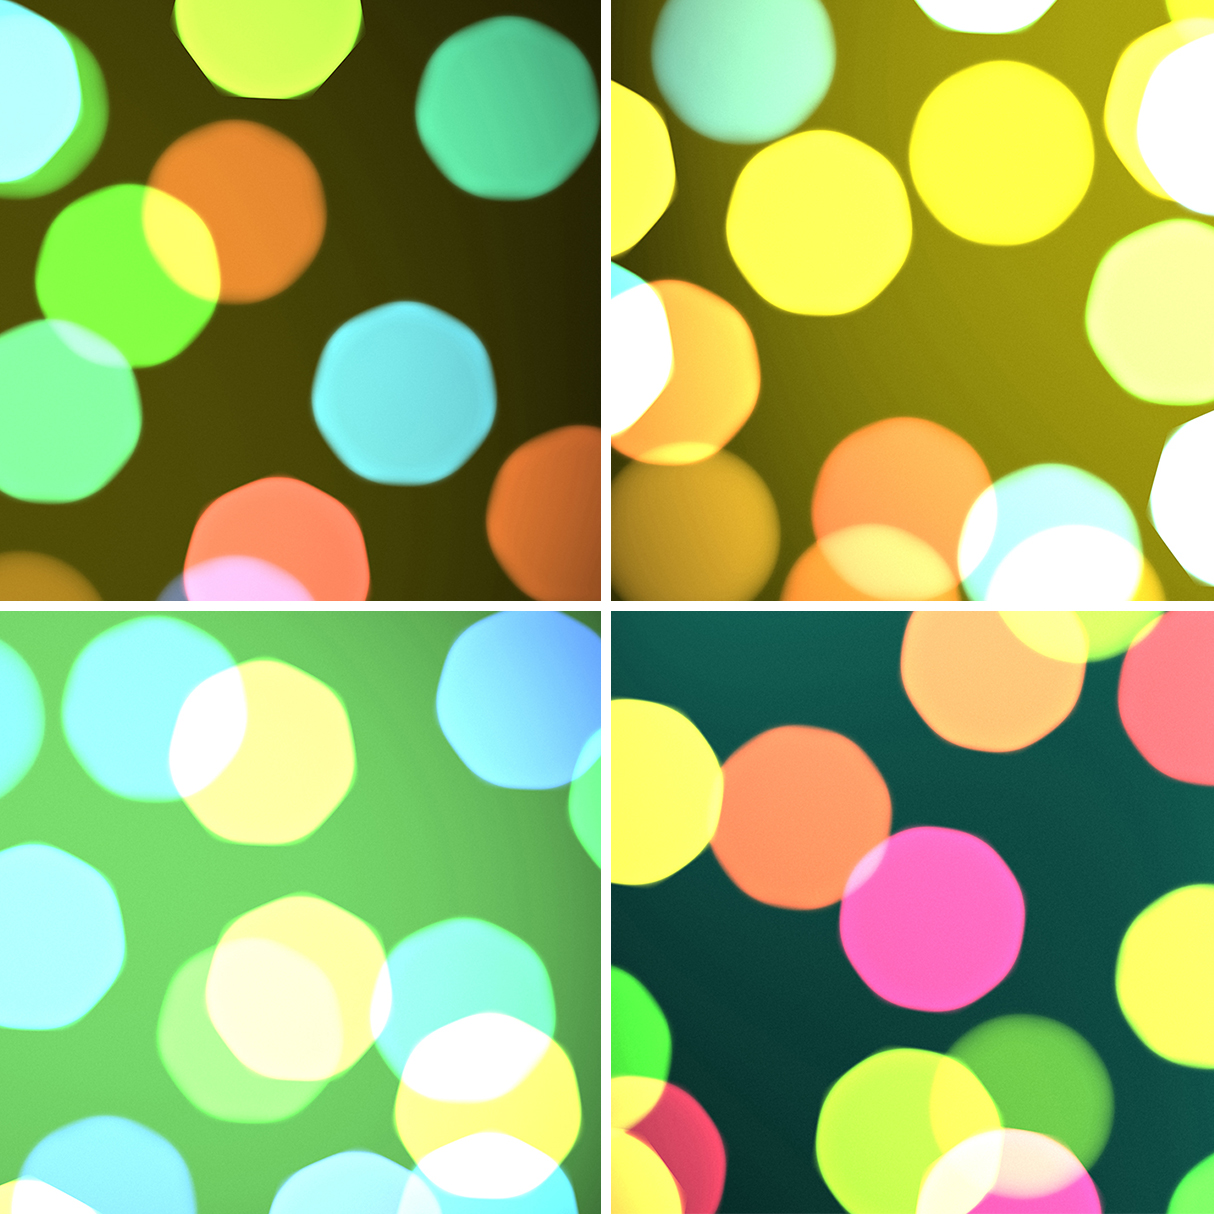 50 Bokeh Pro Backgrounds Samples Preview – Part 9